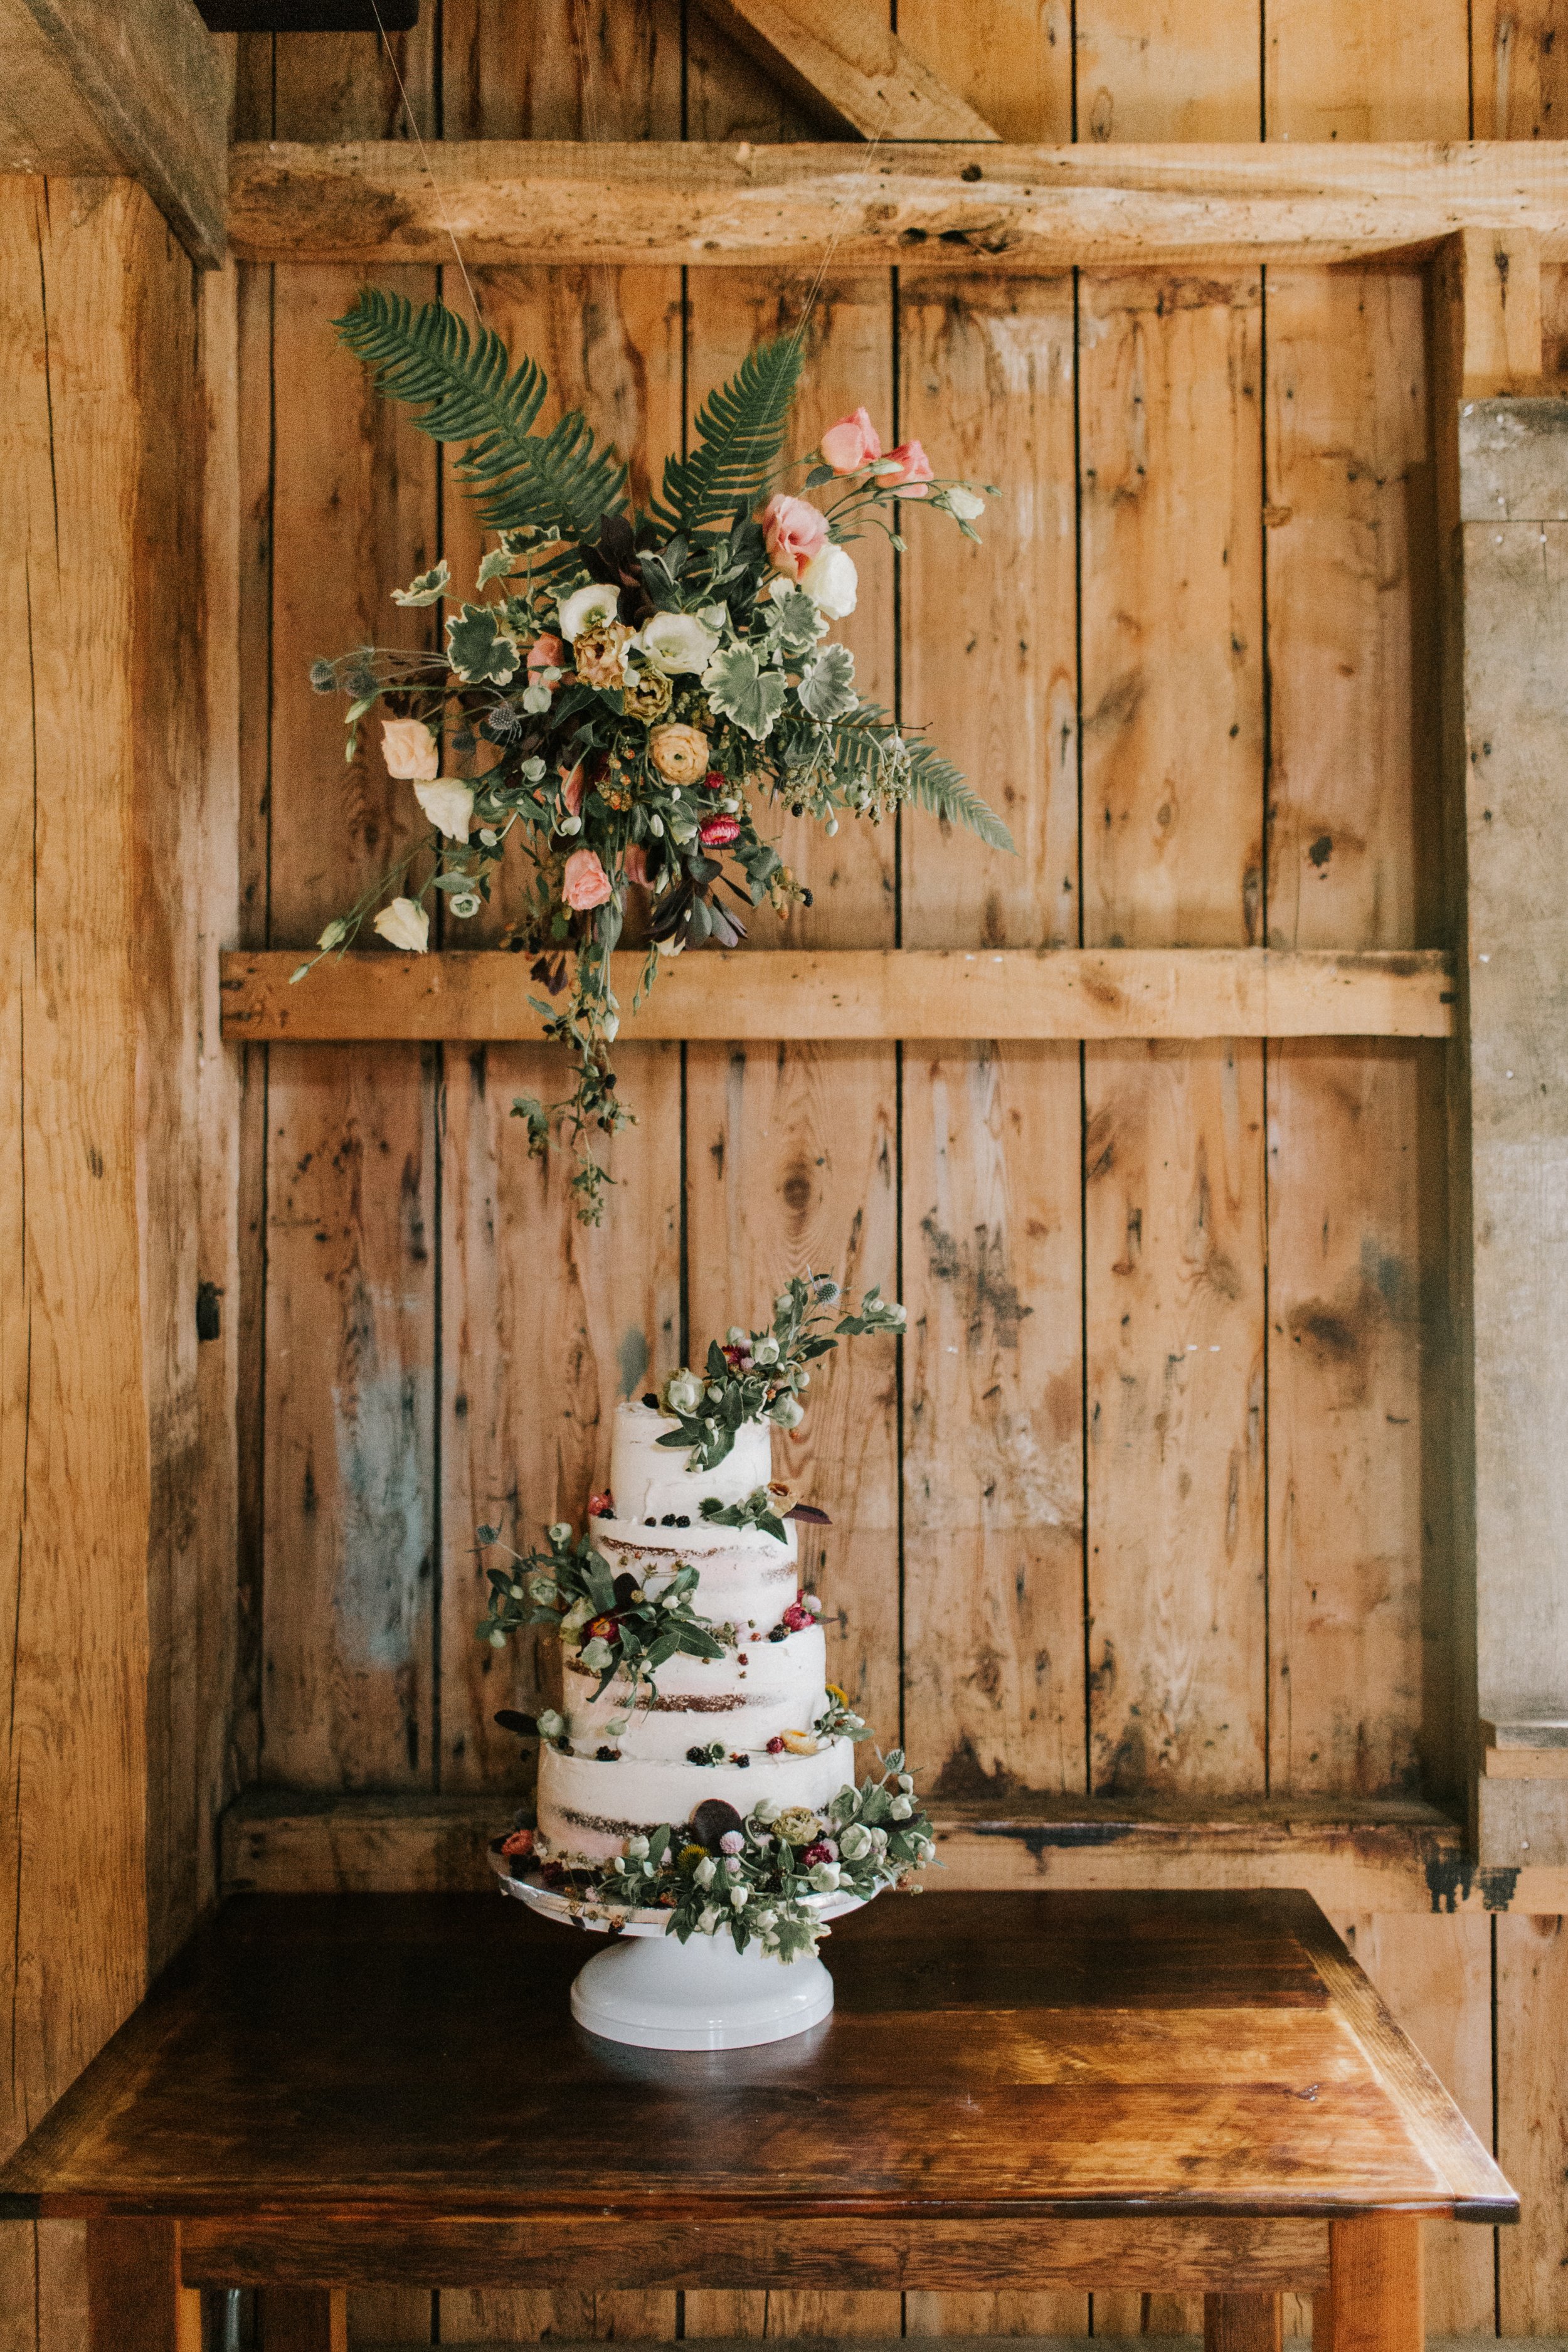 Floating Floral Installation by Cake Display at Maine Barn Wedding